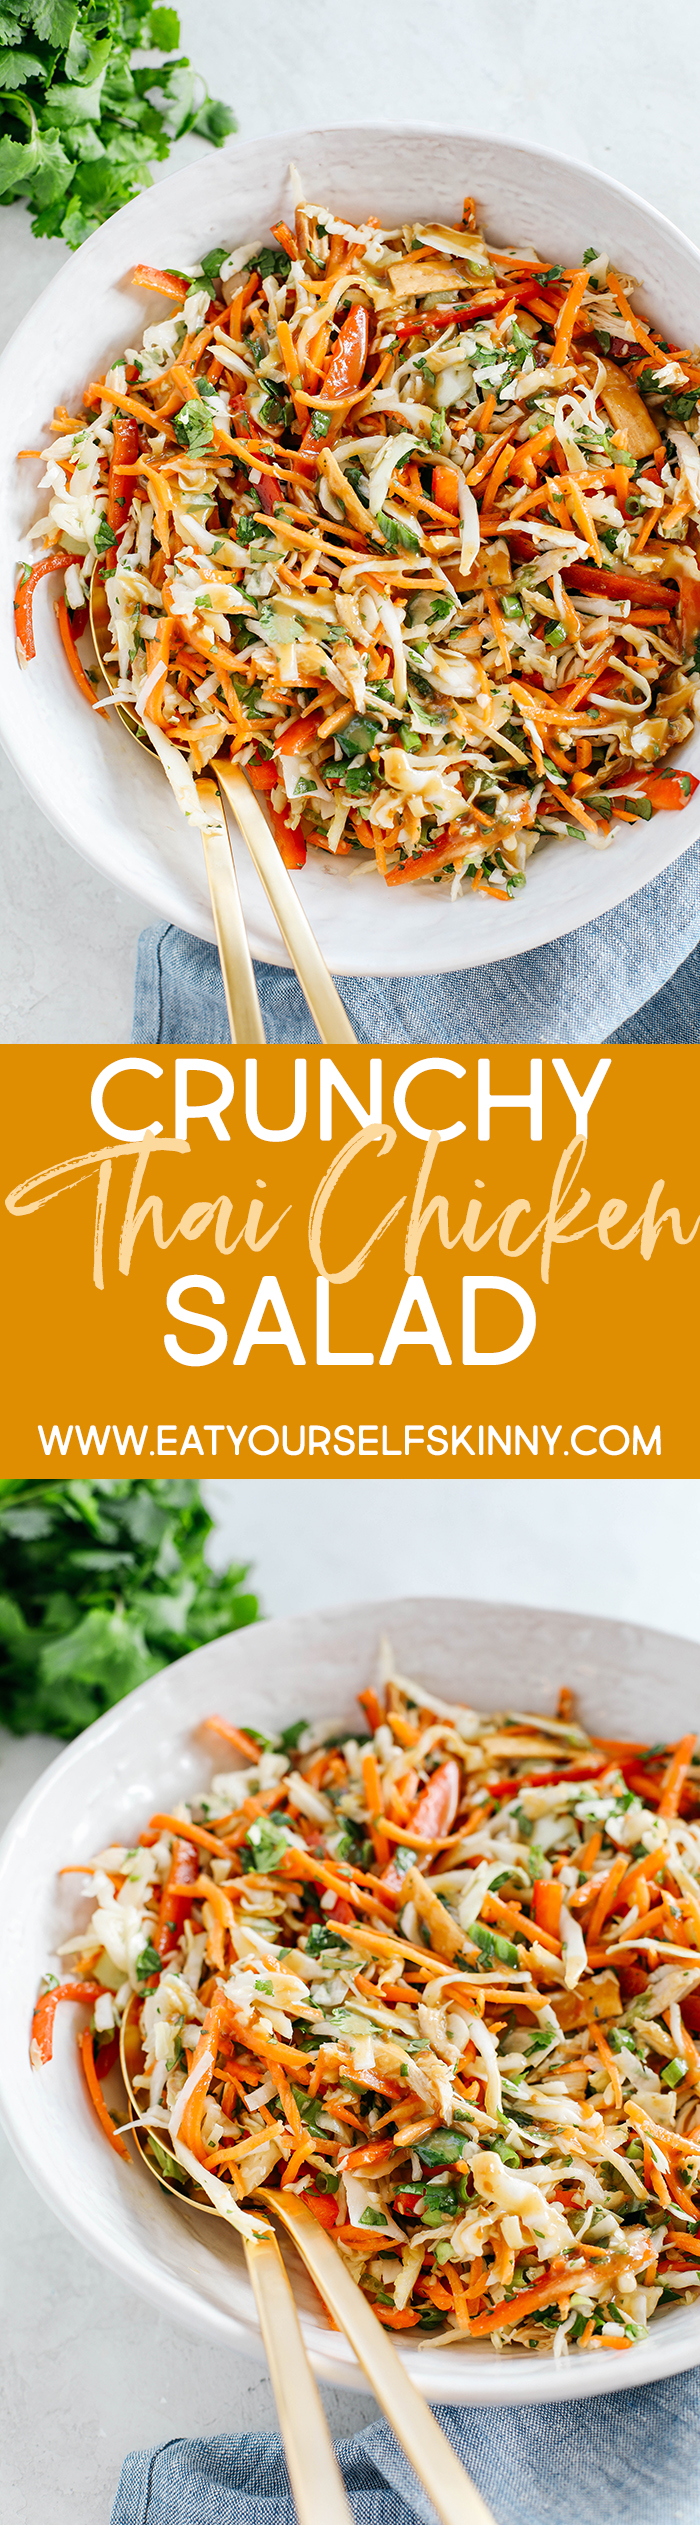 Fresh and crunchy Thai Chicken Salad filled with cabbage, bell peppers, carrots and cilantro all tossed together with a delicious ginger-sesame vinaigrette!